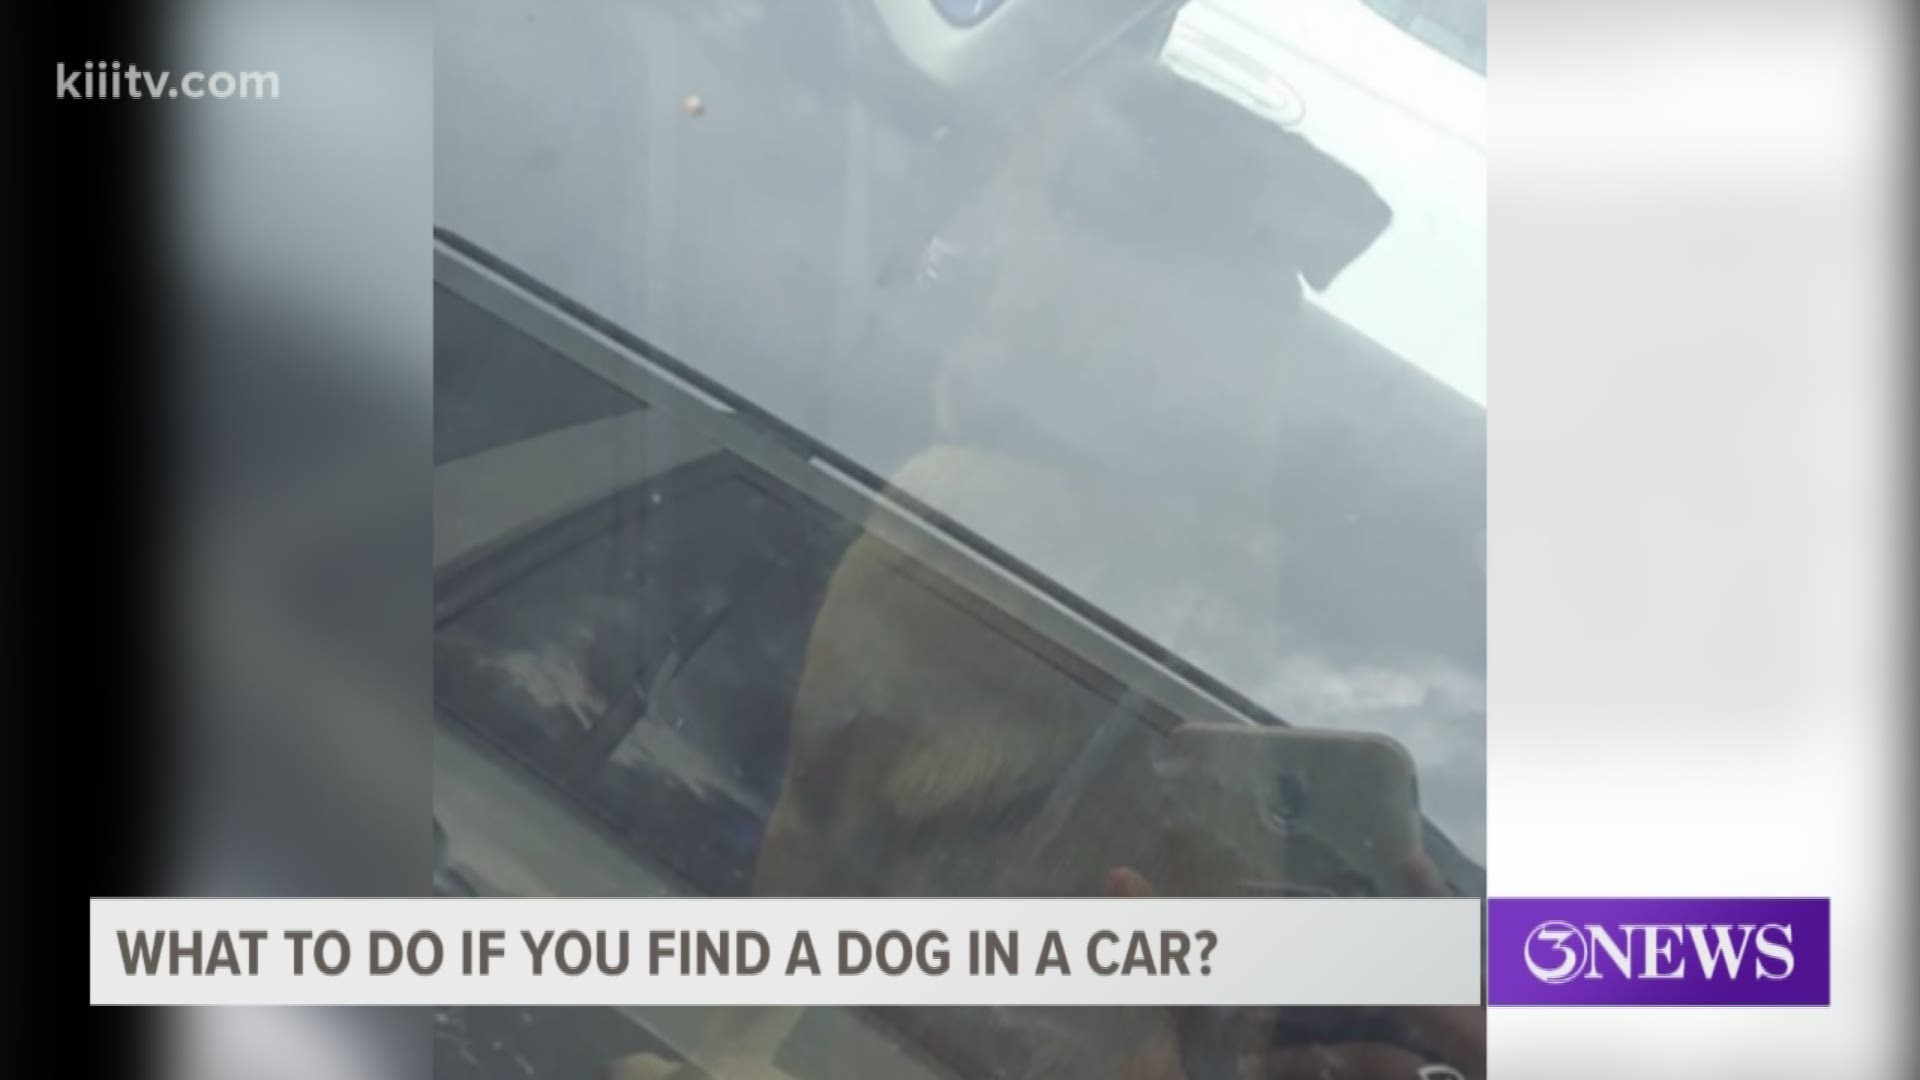 A Coastal Bend woman recently came across a dog left in a parked vehicle during the heat of the day and asked 3News to verify if someone would face any legal problems if they ended up breaking a vehicle window to rescue a pet.